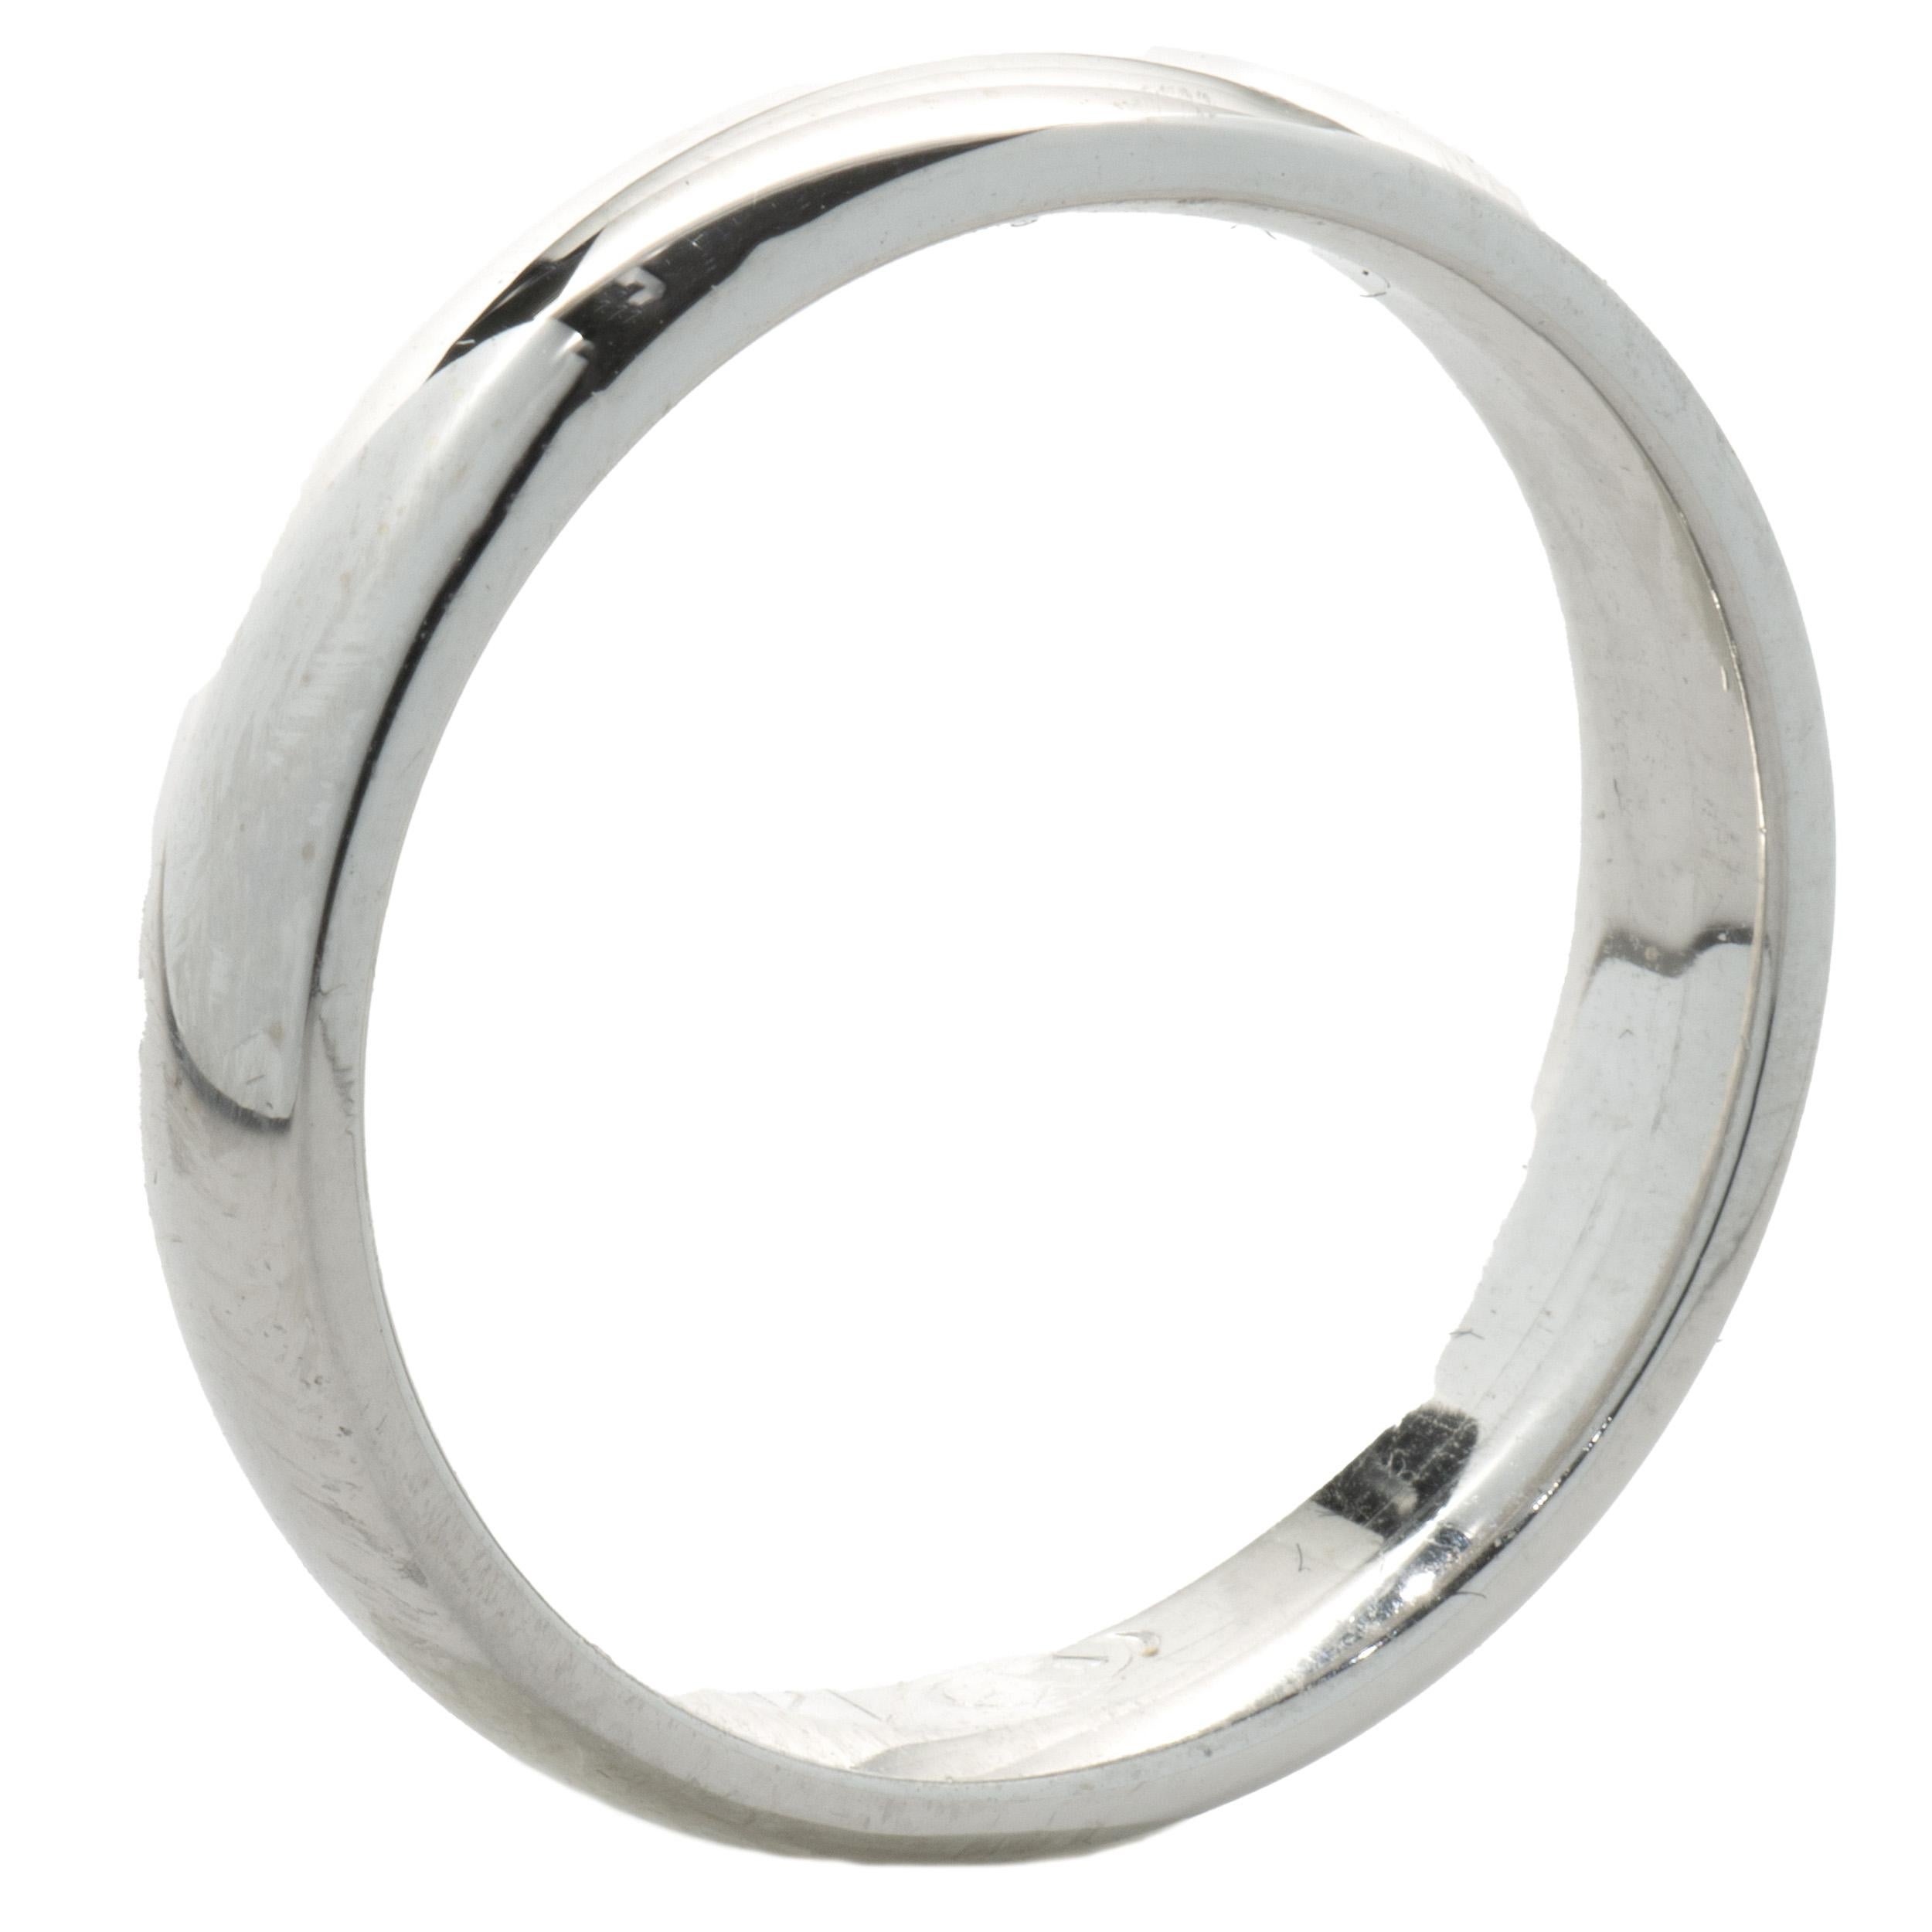 Designer: custom
Material: 14K white gold
Dimension: ring measures 4mm wide
Size: 5.75
Weight: 3.96 grams